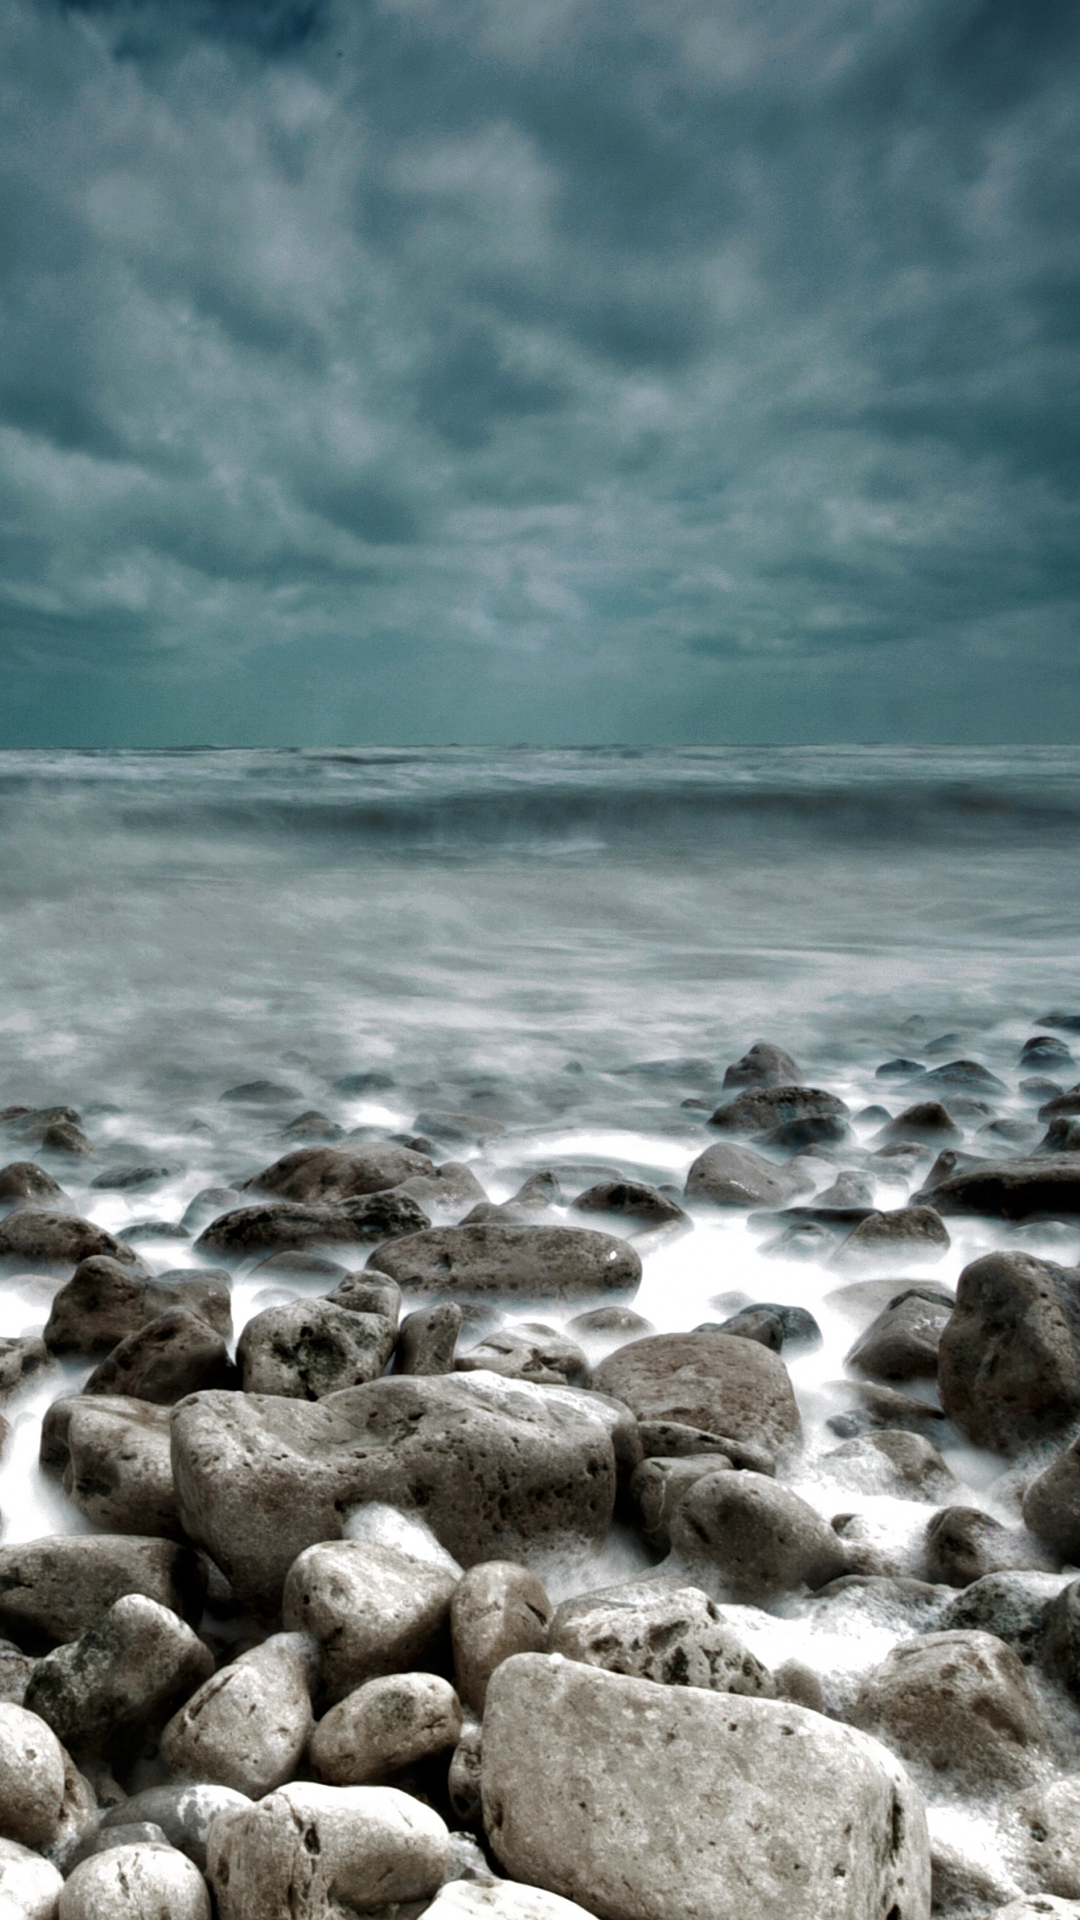 Stormy Sea htc one wallpaper, free and easy to download